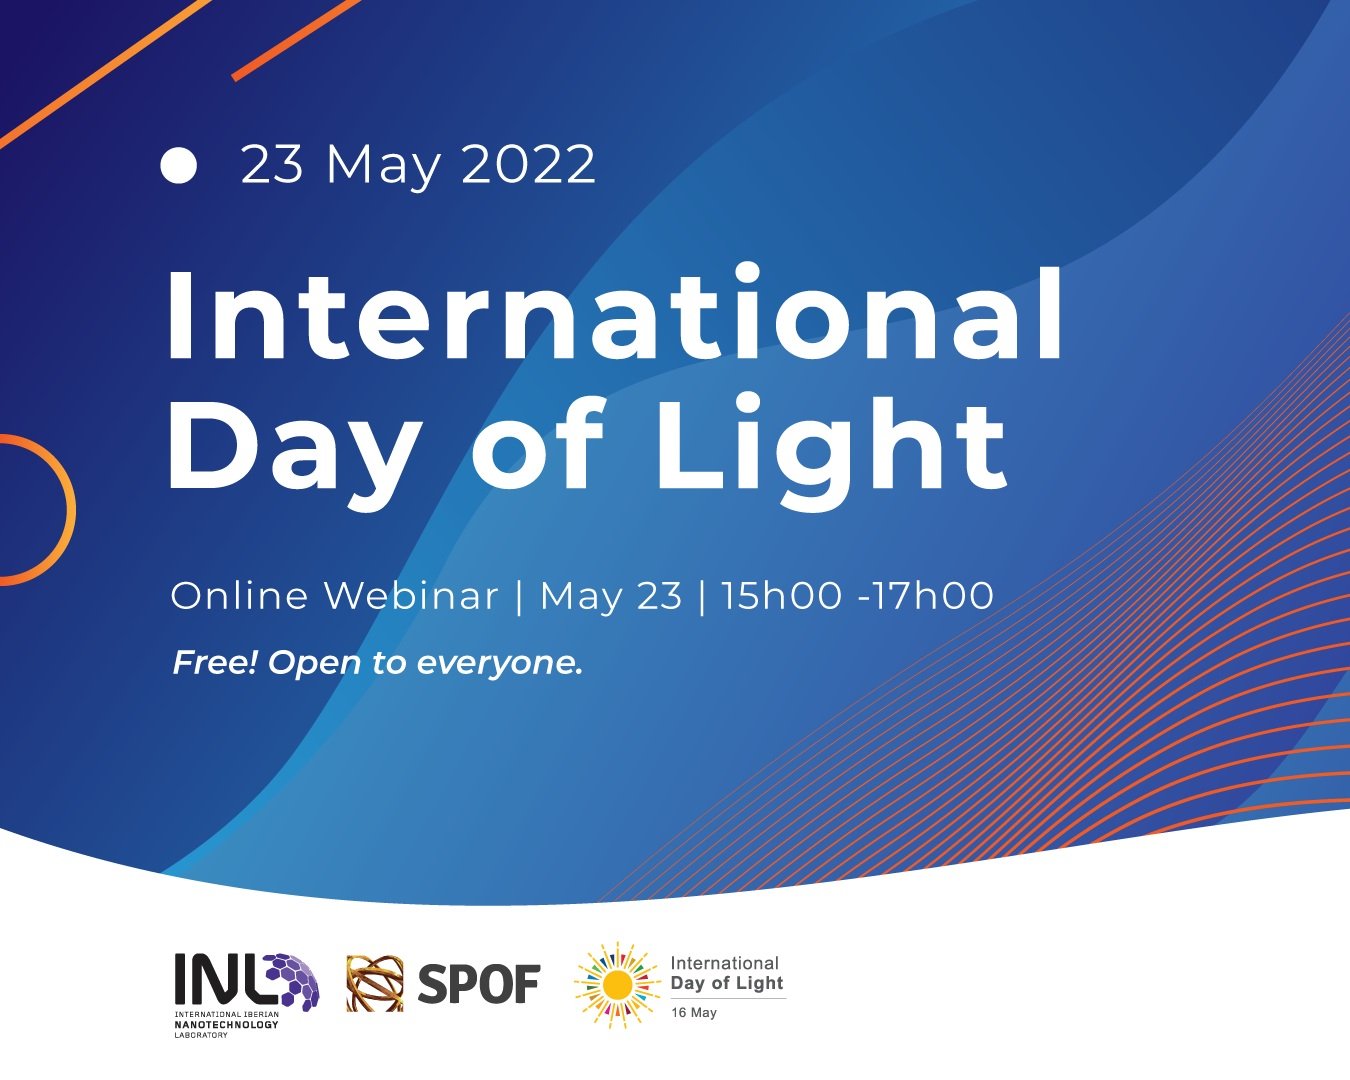 Celebrating the International Day of Light 2022 at INL